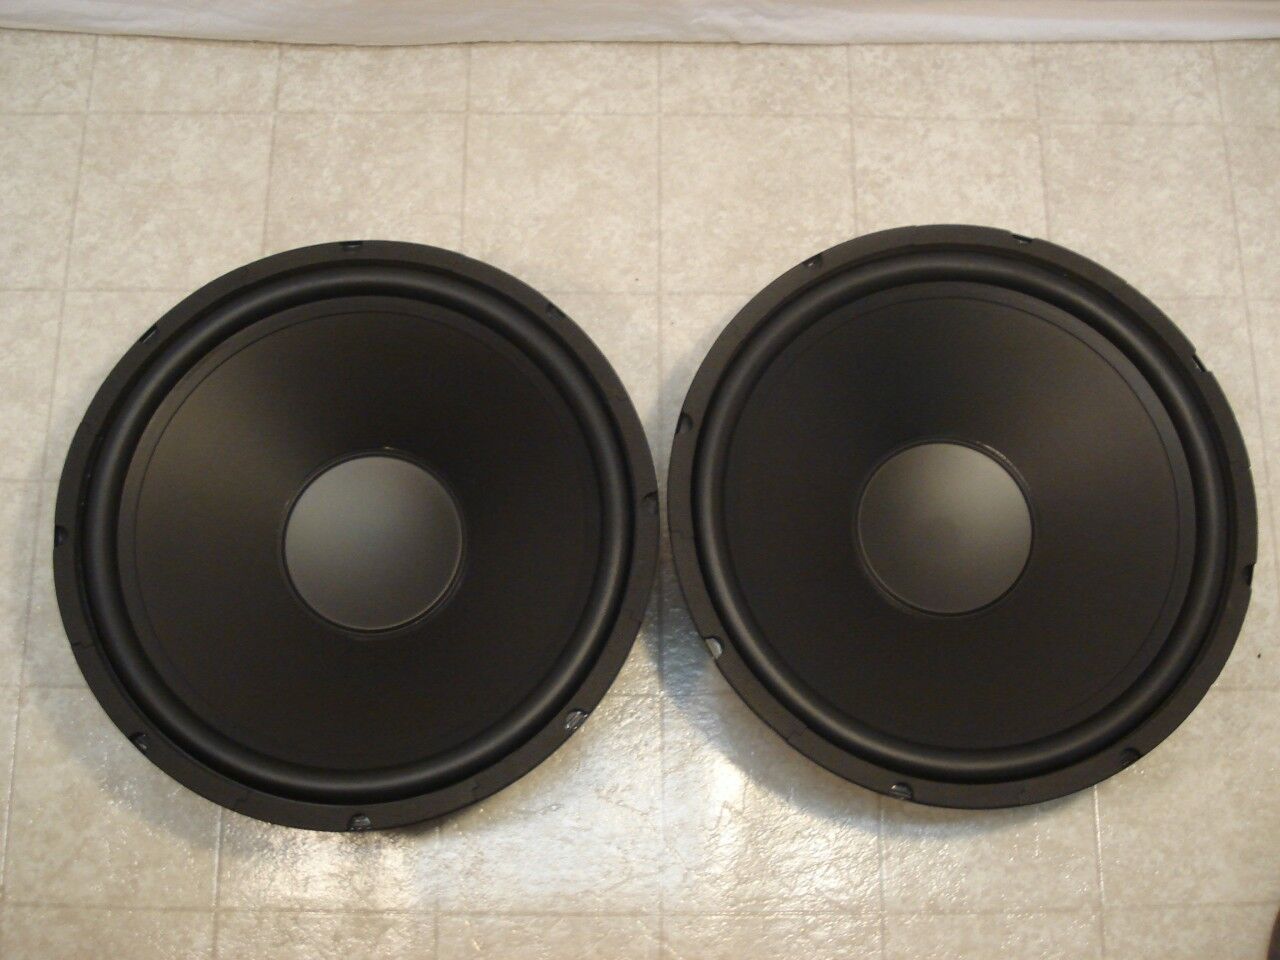 NEW (2) 15" Subwoofer Replacement Speakers.4 ohm.fifteen inch bass sub Woofers audioselect 15inch.replacement woofers.15in altavoz